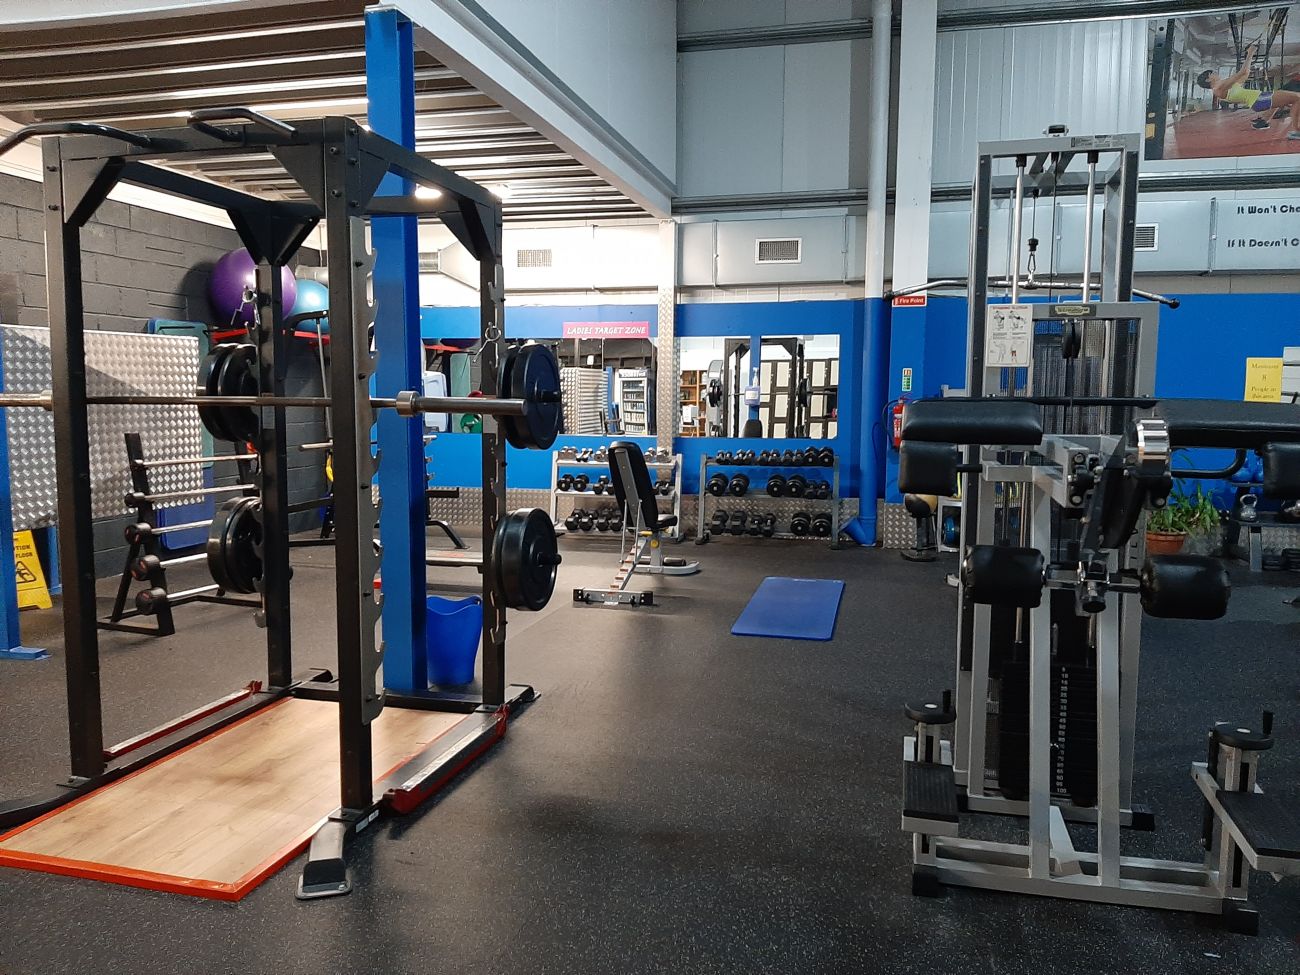 Gallery - ClubActive - Mullingar's Biggest and Most Innovative Gym